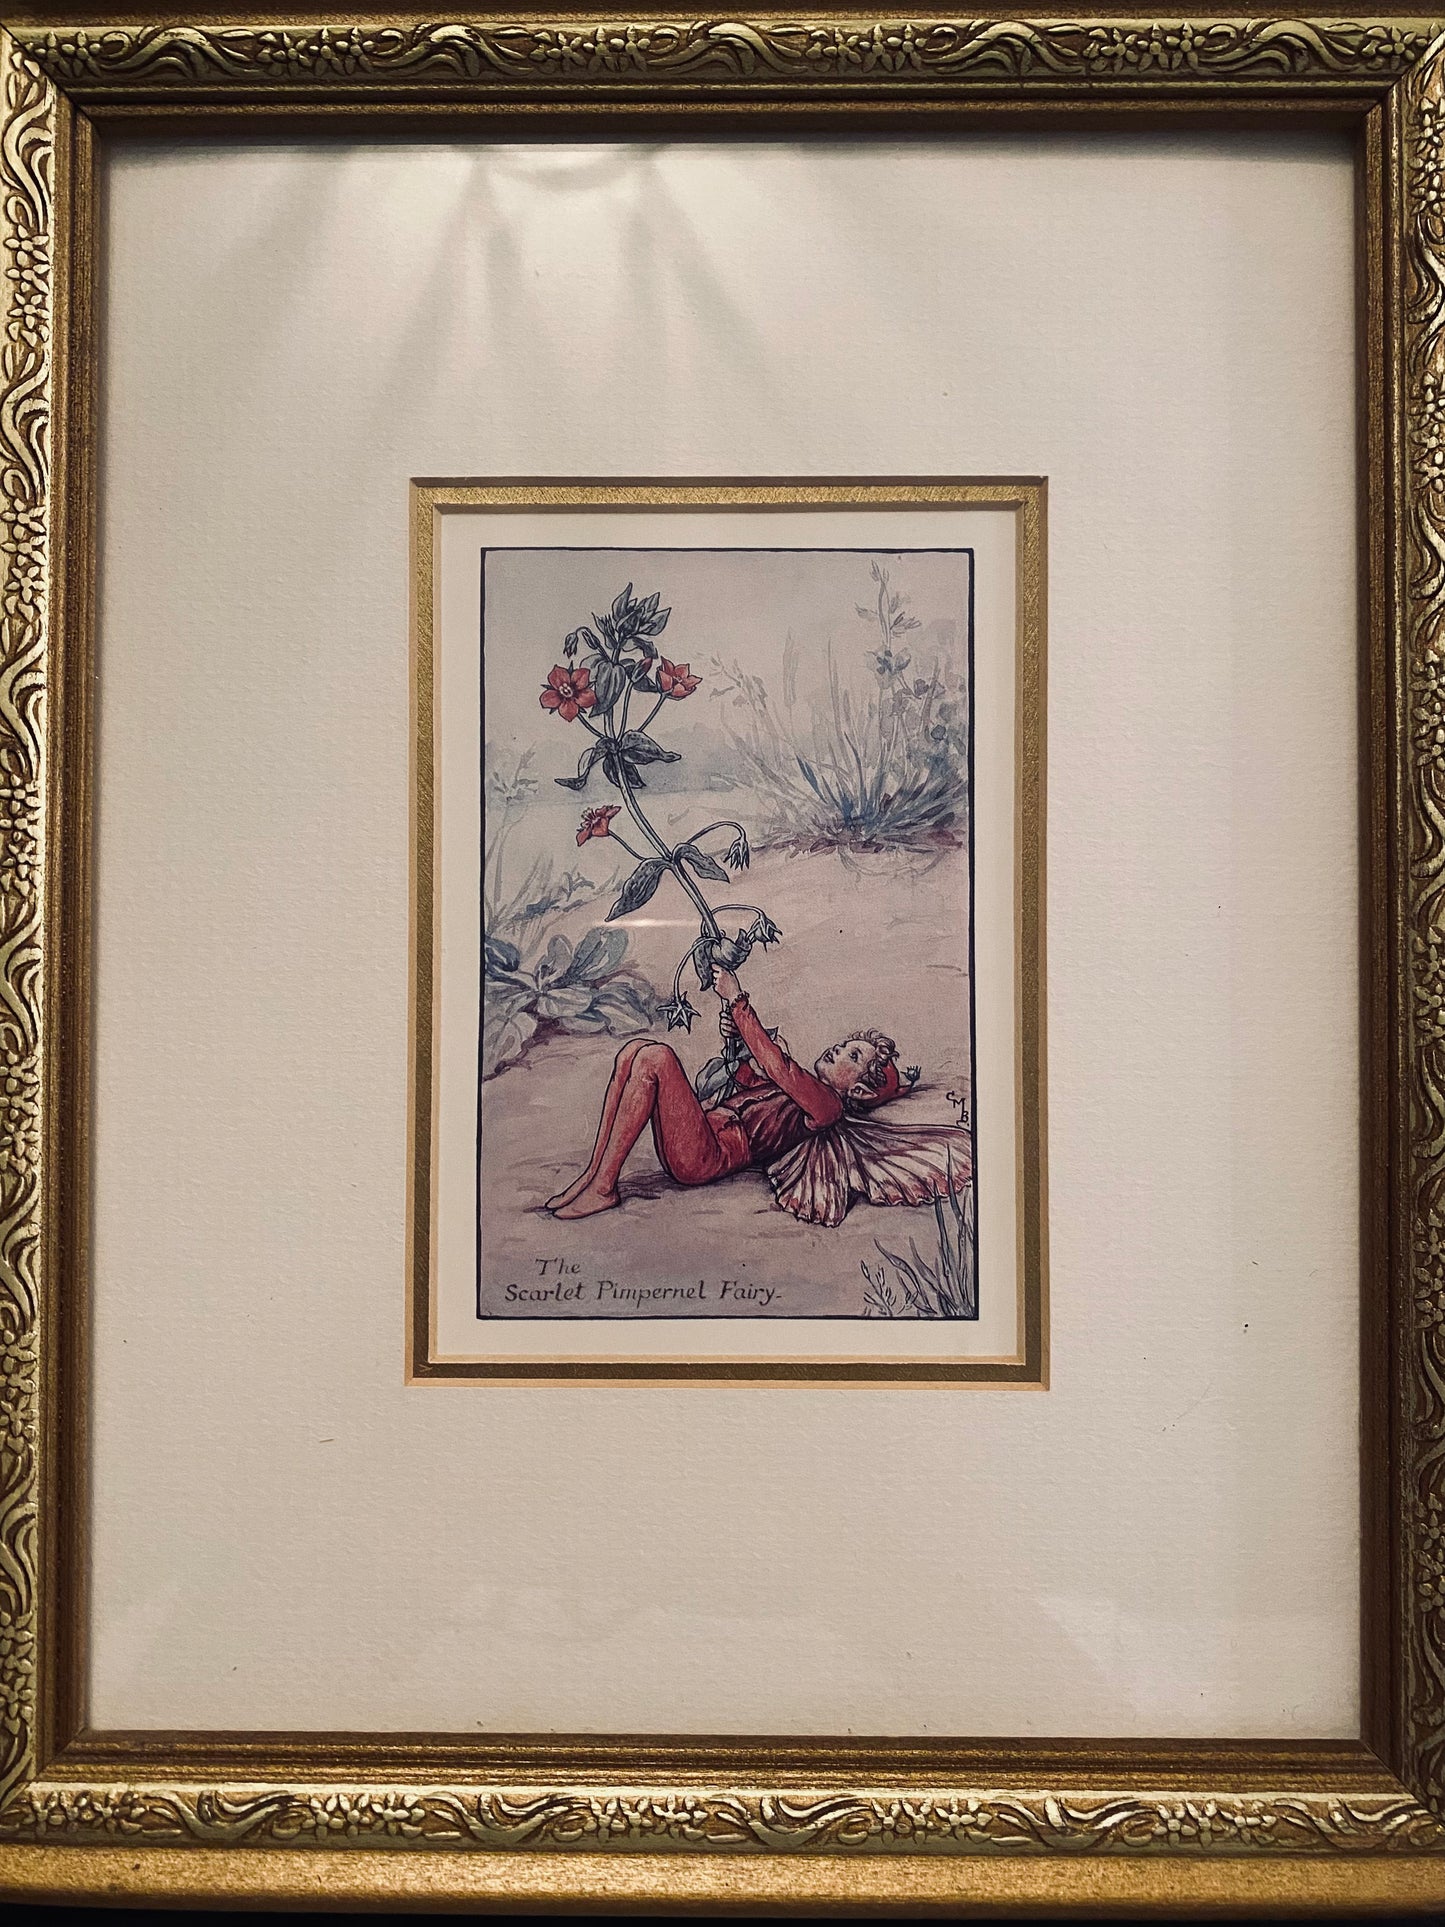 Gold Framed Fairy Print, Scarlet Pimpernel from Cicely Mary Barker’s Flower Fairies